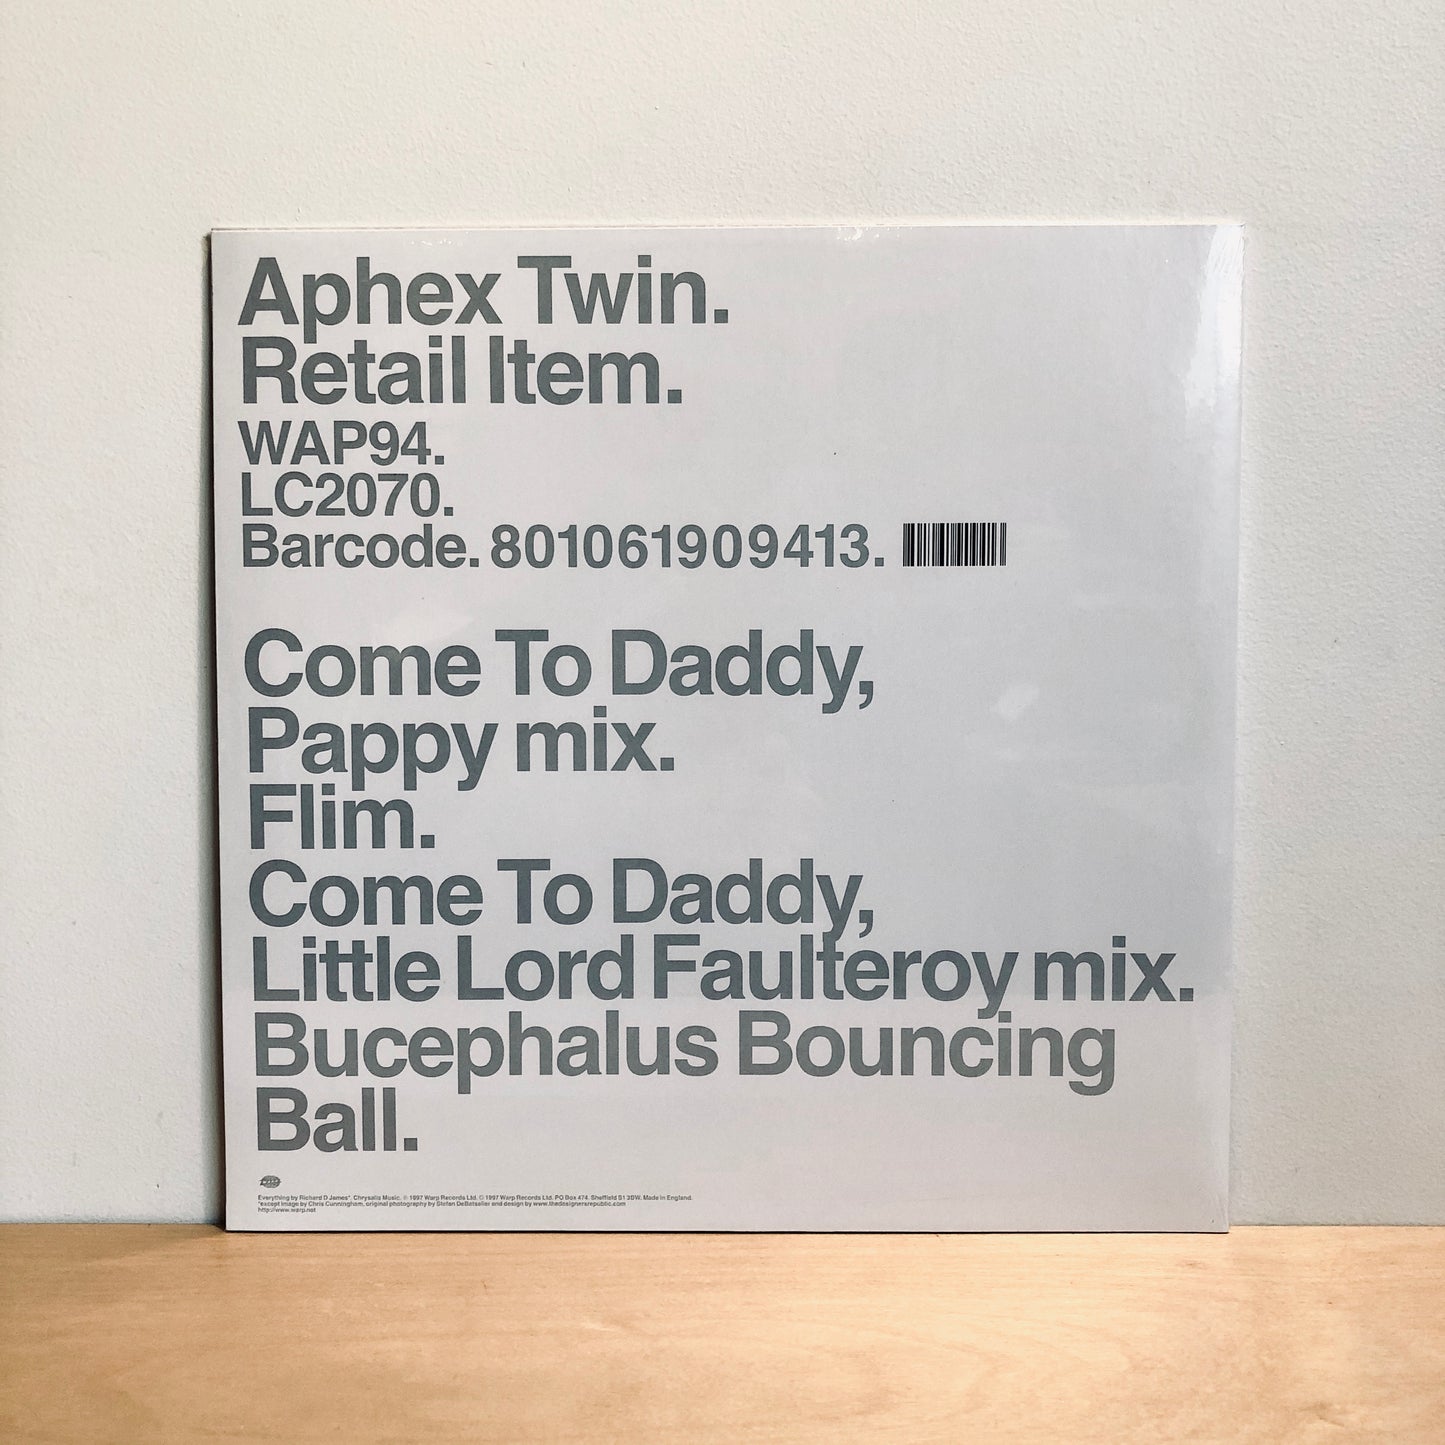 Aphex Twin - Come To Daddy. 12" EP